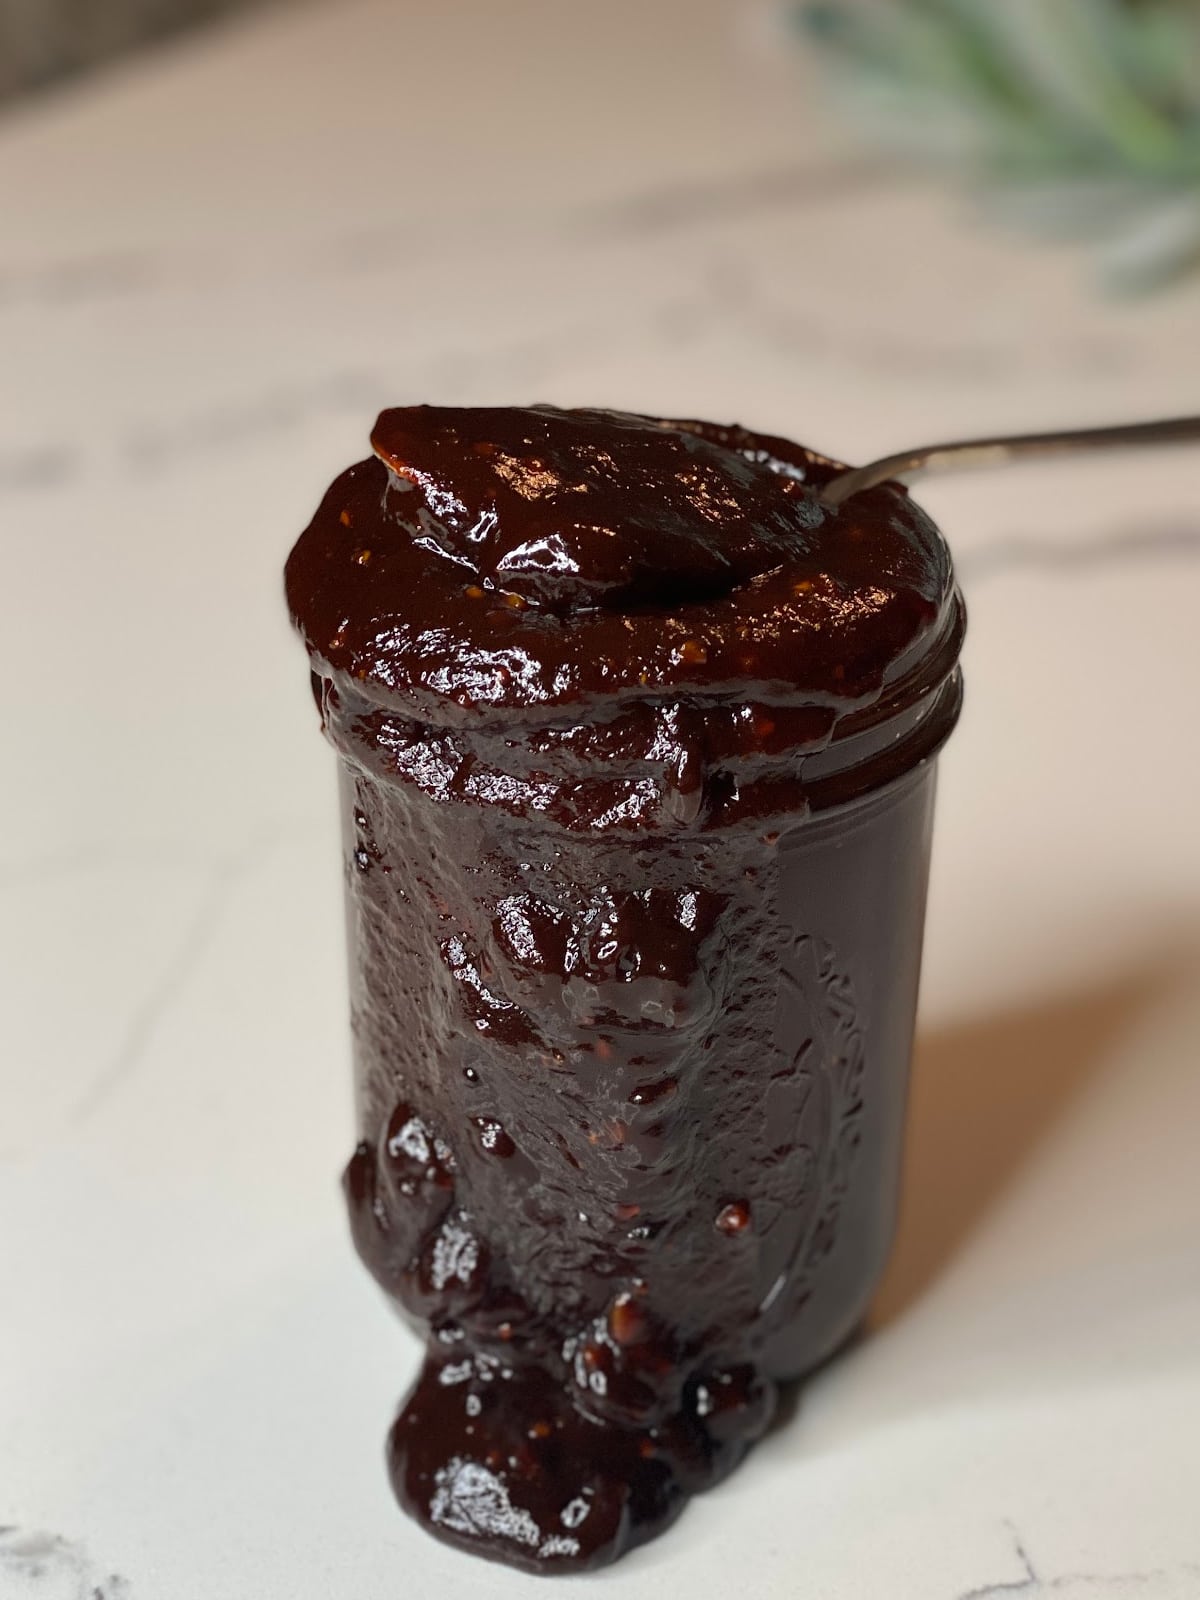 Homemade BBQ Sauce dripping out of jar with spoon